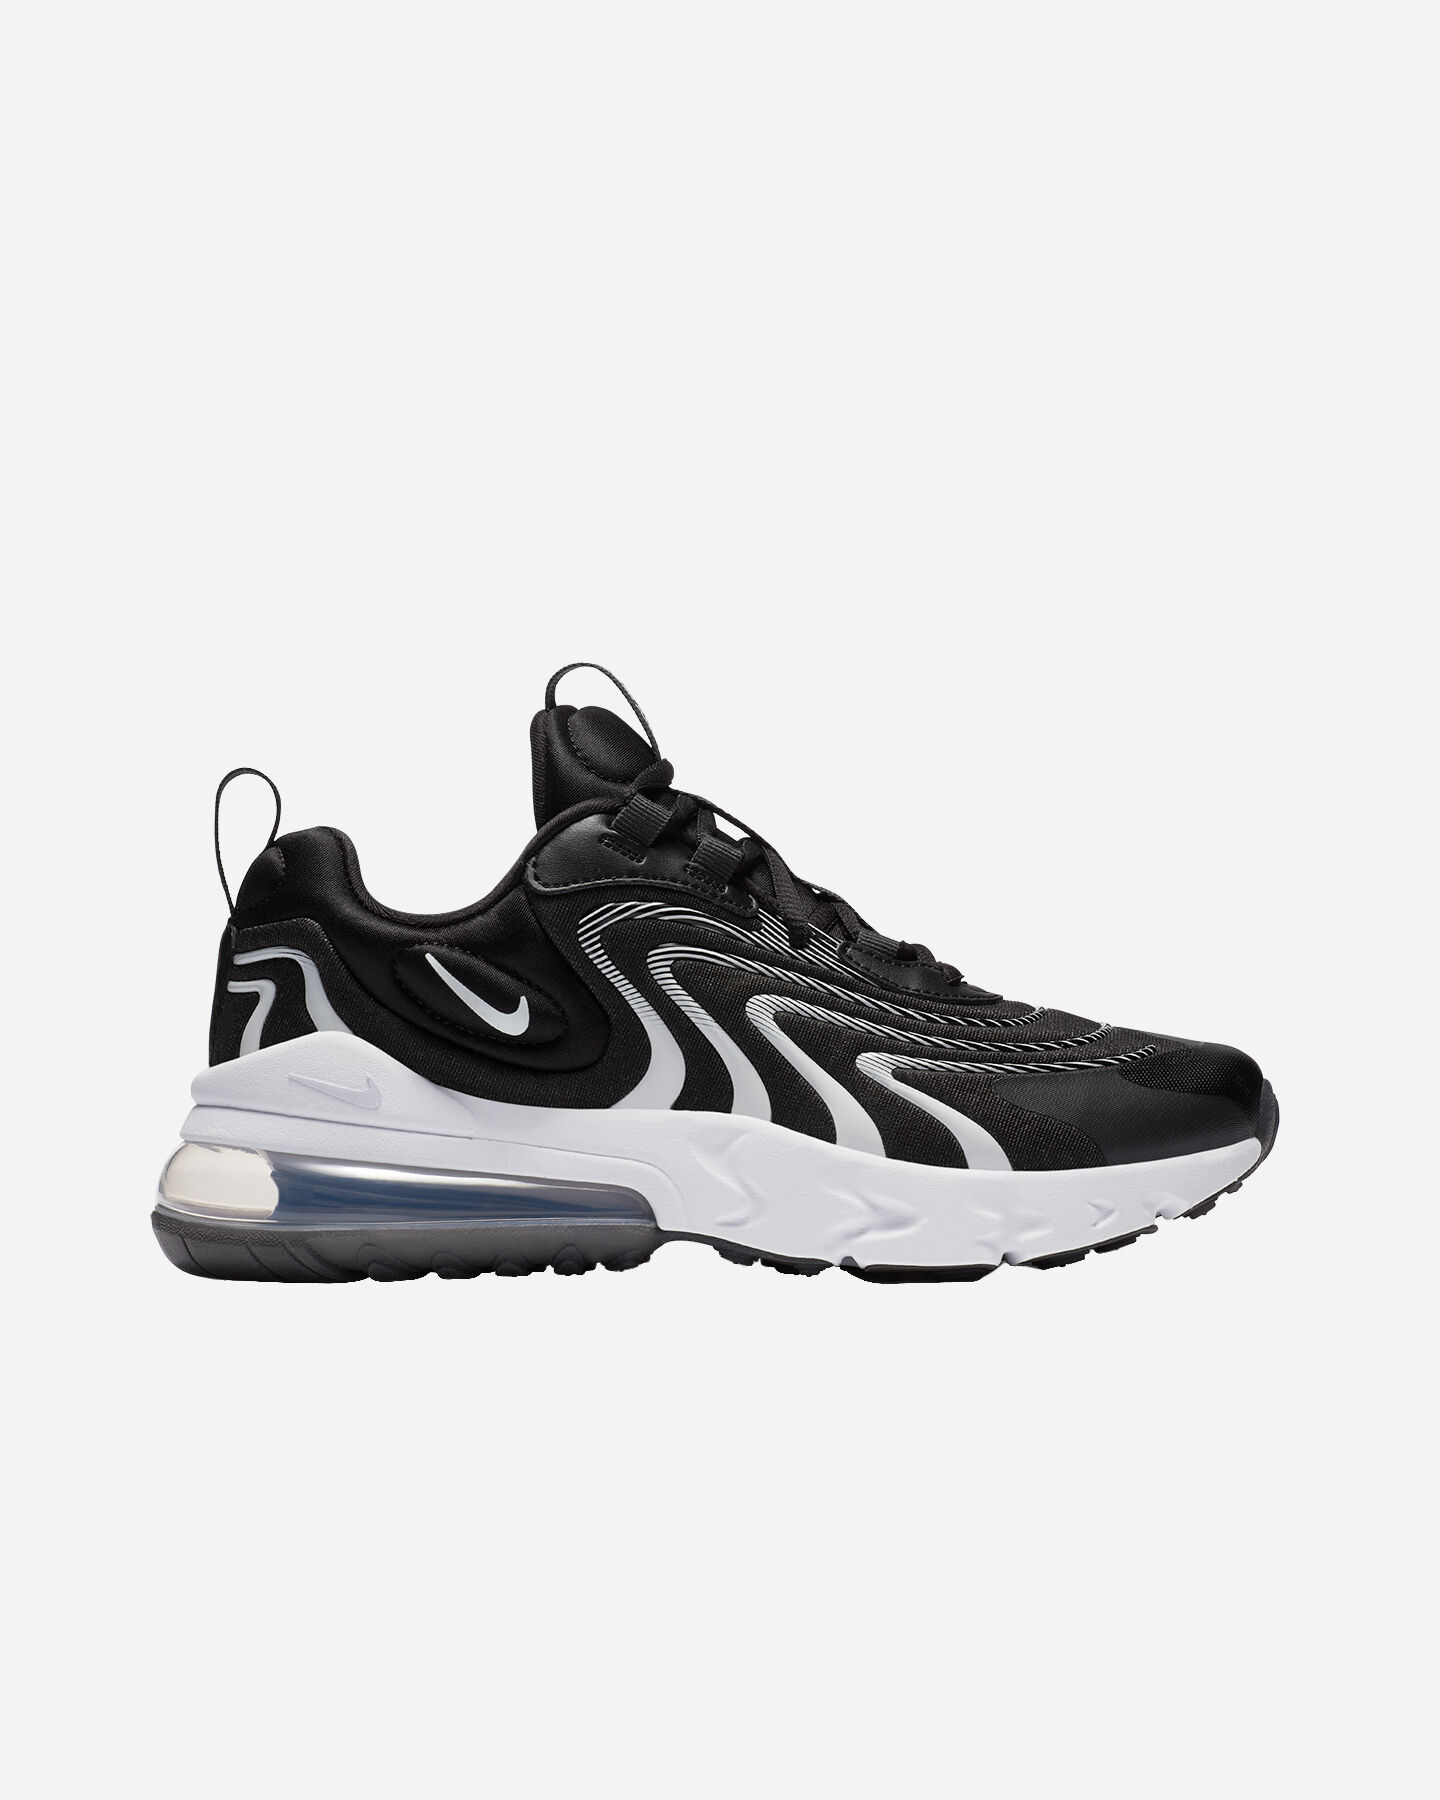  Scarpe sneakers NIKE AIR MAX 270 REACT ENG GS JR S5223505|003|3.5Y scatto 0